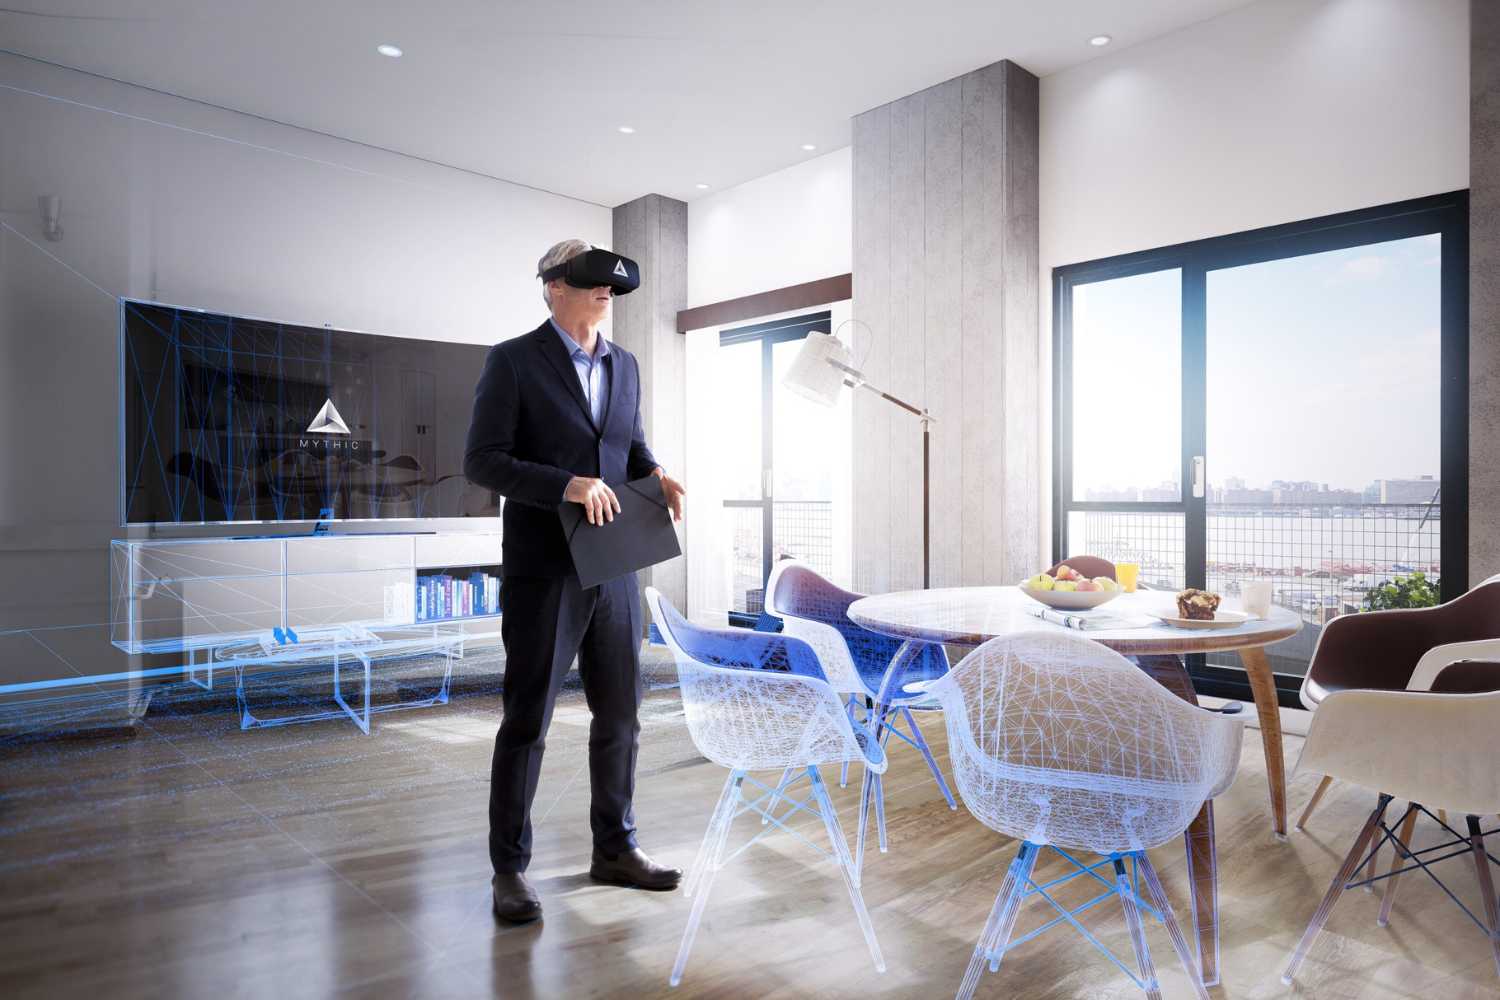 3 ways marketers can capitalize on virtual real estate